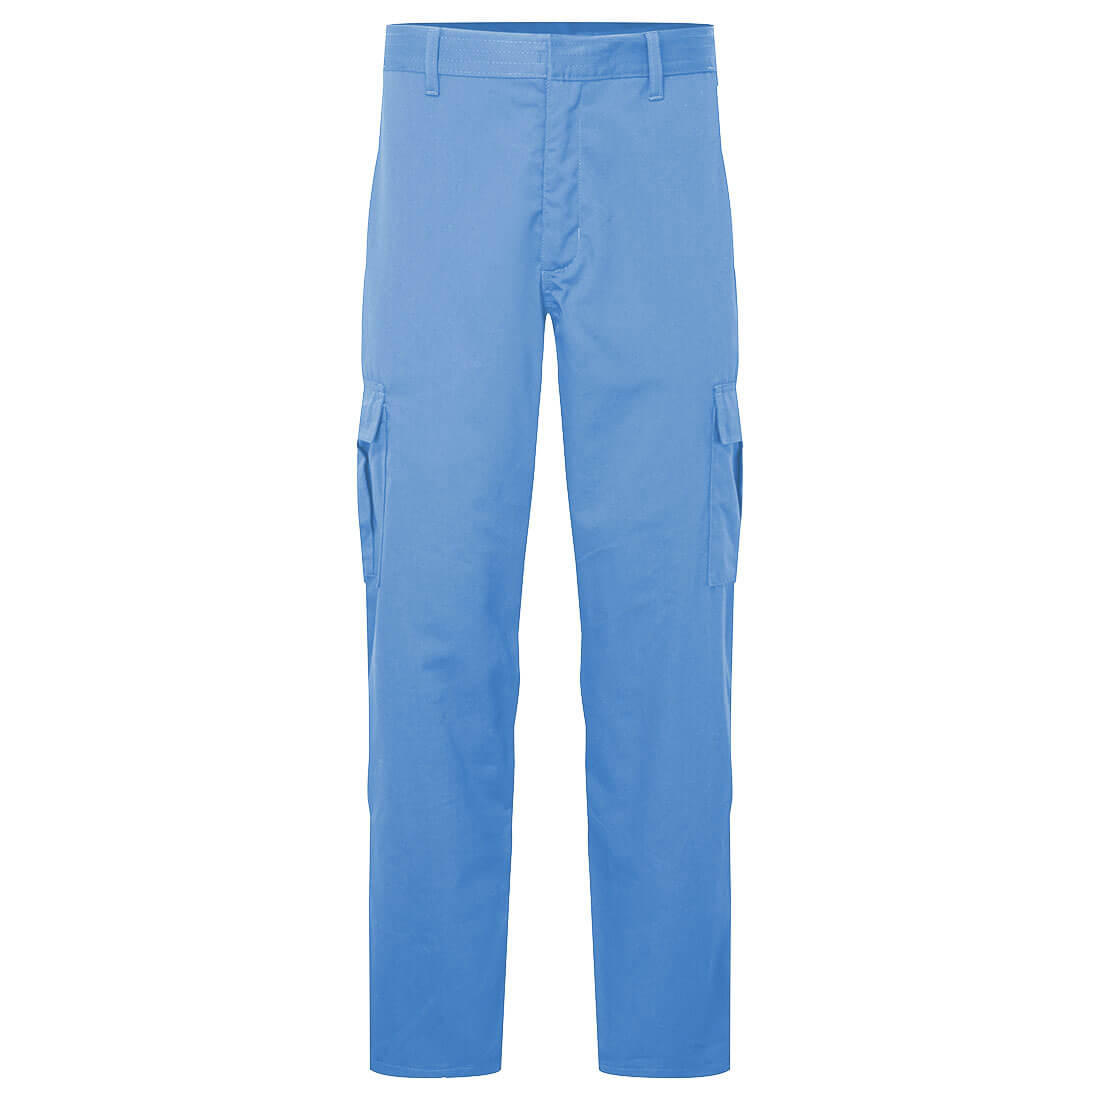 Portwest AS12 Women's Anti-Static ESD Trousers for ESD Workwear